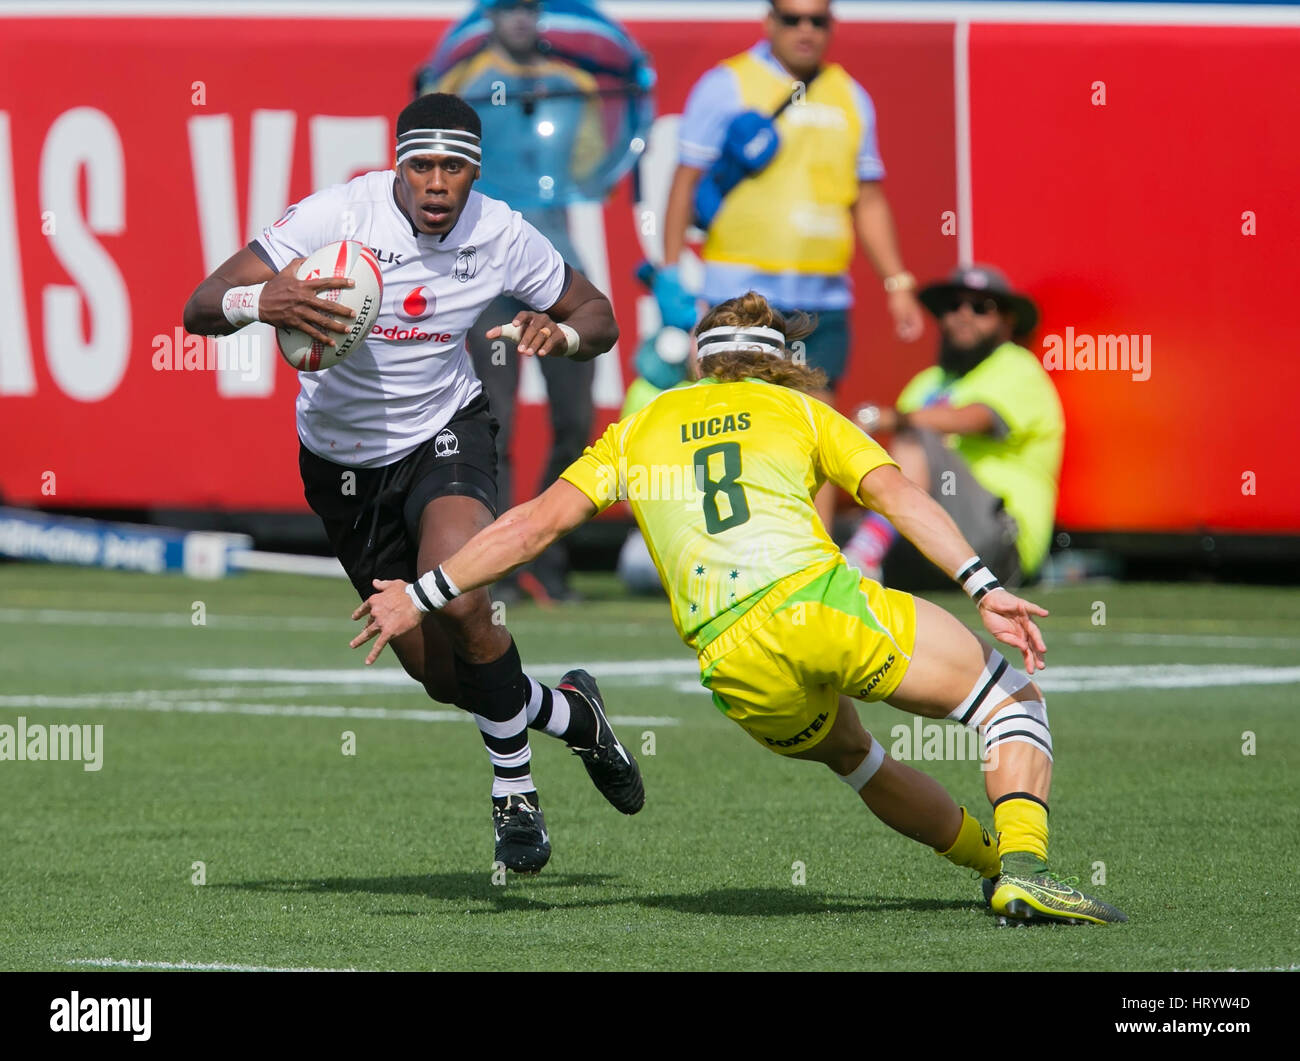 Las Vegas, NV, USA. 4th Mar, 2017. Kalione Nasoko #3 of Fiji in action during Pool d play of the rugby sevens match between the Fiji and Australia at Sam Boyd Stadium in Las Vegas, Nv. Fiji defeated the Australia 24-17. Damon Tarver/Cal Sport Media/Alamy Live News Stock Photo